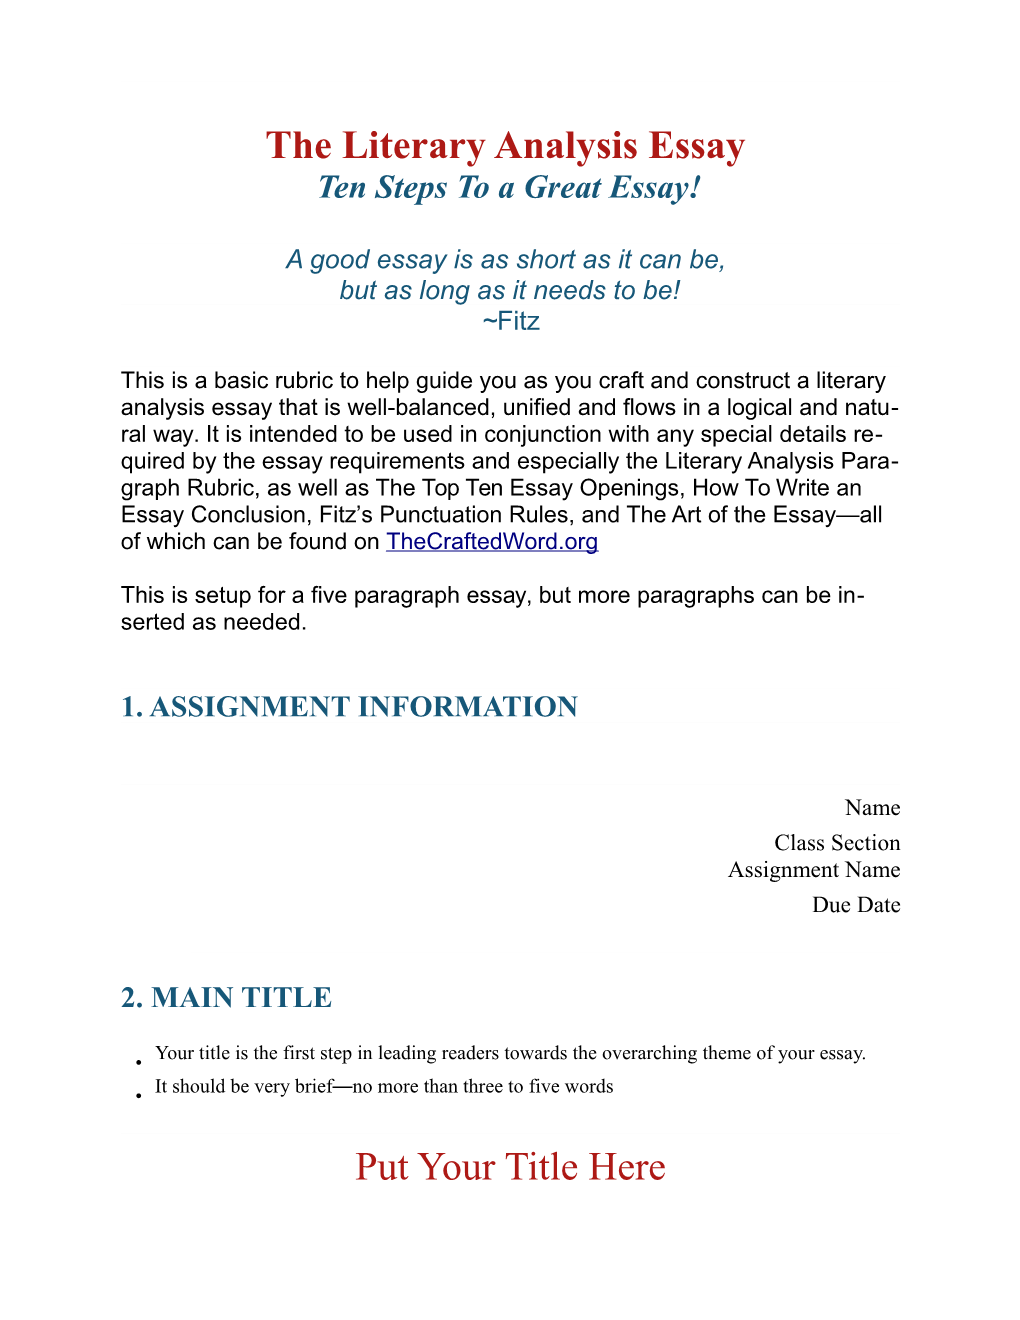 The Literary Analysis Essay Ten Steps to a Great Essay!